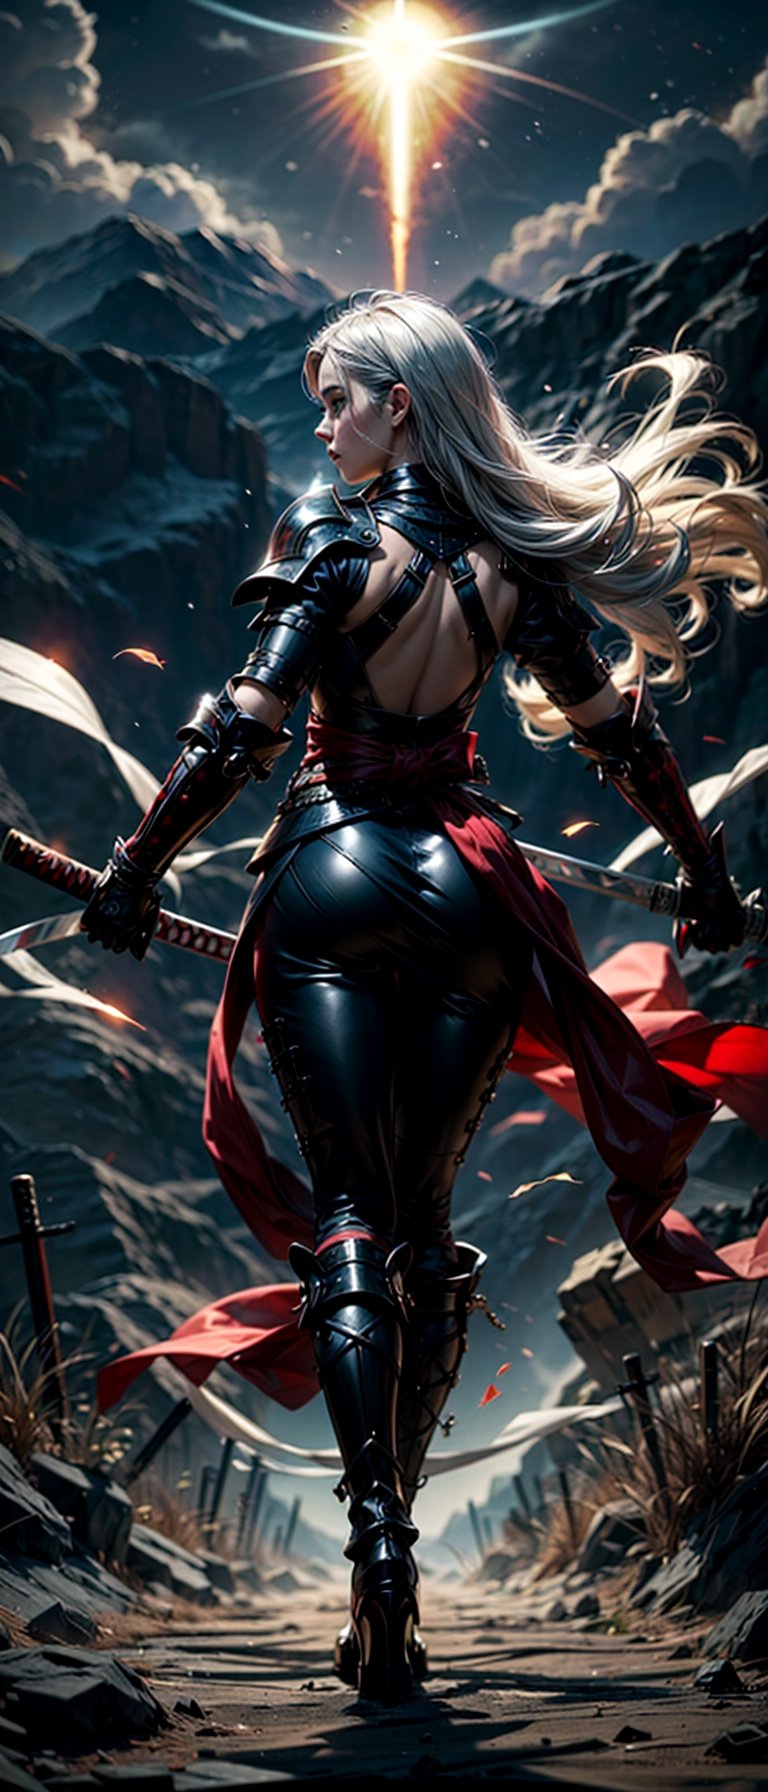 <image>In this otherworldly scene, (an ethereal beauty clad in the armor of a samurai), (her graceful figure adorned with the markings of a venom symbiote). (Her long silver hair flows behind her, dancing in the unearthly wind). (She wields a glowing blue katana with deadly precision), (the blade slashing through the air in a graceful arc). (A mechanized suit of armor, (almost organic in its design), (covers her lower body, its joints moving with an otherworldly fluidity). (Her face remains stoic and unyielding, focused on the enemy before her).

(In the background, (a bizarre alien landscape), (with towering crystalline structures and (shimmering fields of energy)). (The sky above is a swirling vortex of colors, (as if the very fabric of reality is being warped and twisted)). (The air crackles with the energy of an impending storm). (Suddenly, a beam of light cuts through the sky, striking the ground nearby). (The impact sends a shockwave rippling across the landscape, causing the samurai lady to lose her balance for a moment). (She regains her composure quickly, (focusing on the task at hand))). (As she prepares to deliver the final blow), (a small, glowing orb flies out of nowhere and attaches itself to her back). (The orb pulses with energy, (healing her wounds and replenishing her strength)). (With renewed vigor), (she completes her attack, decapitating her foe). (The headless body crumples to the ground, (as the venomous symbiote detaches itself and floats off into the distance)). (The samurai lady turns away from the battle, (her work now done)). (She walks towards the horizon, (her figure slowly fading into the distance)), (as if she was never there at all),venom